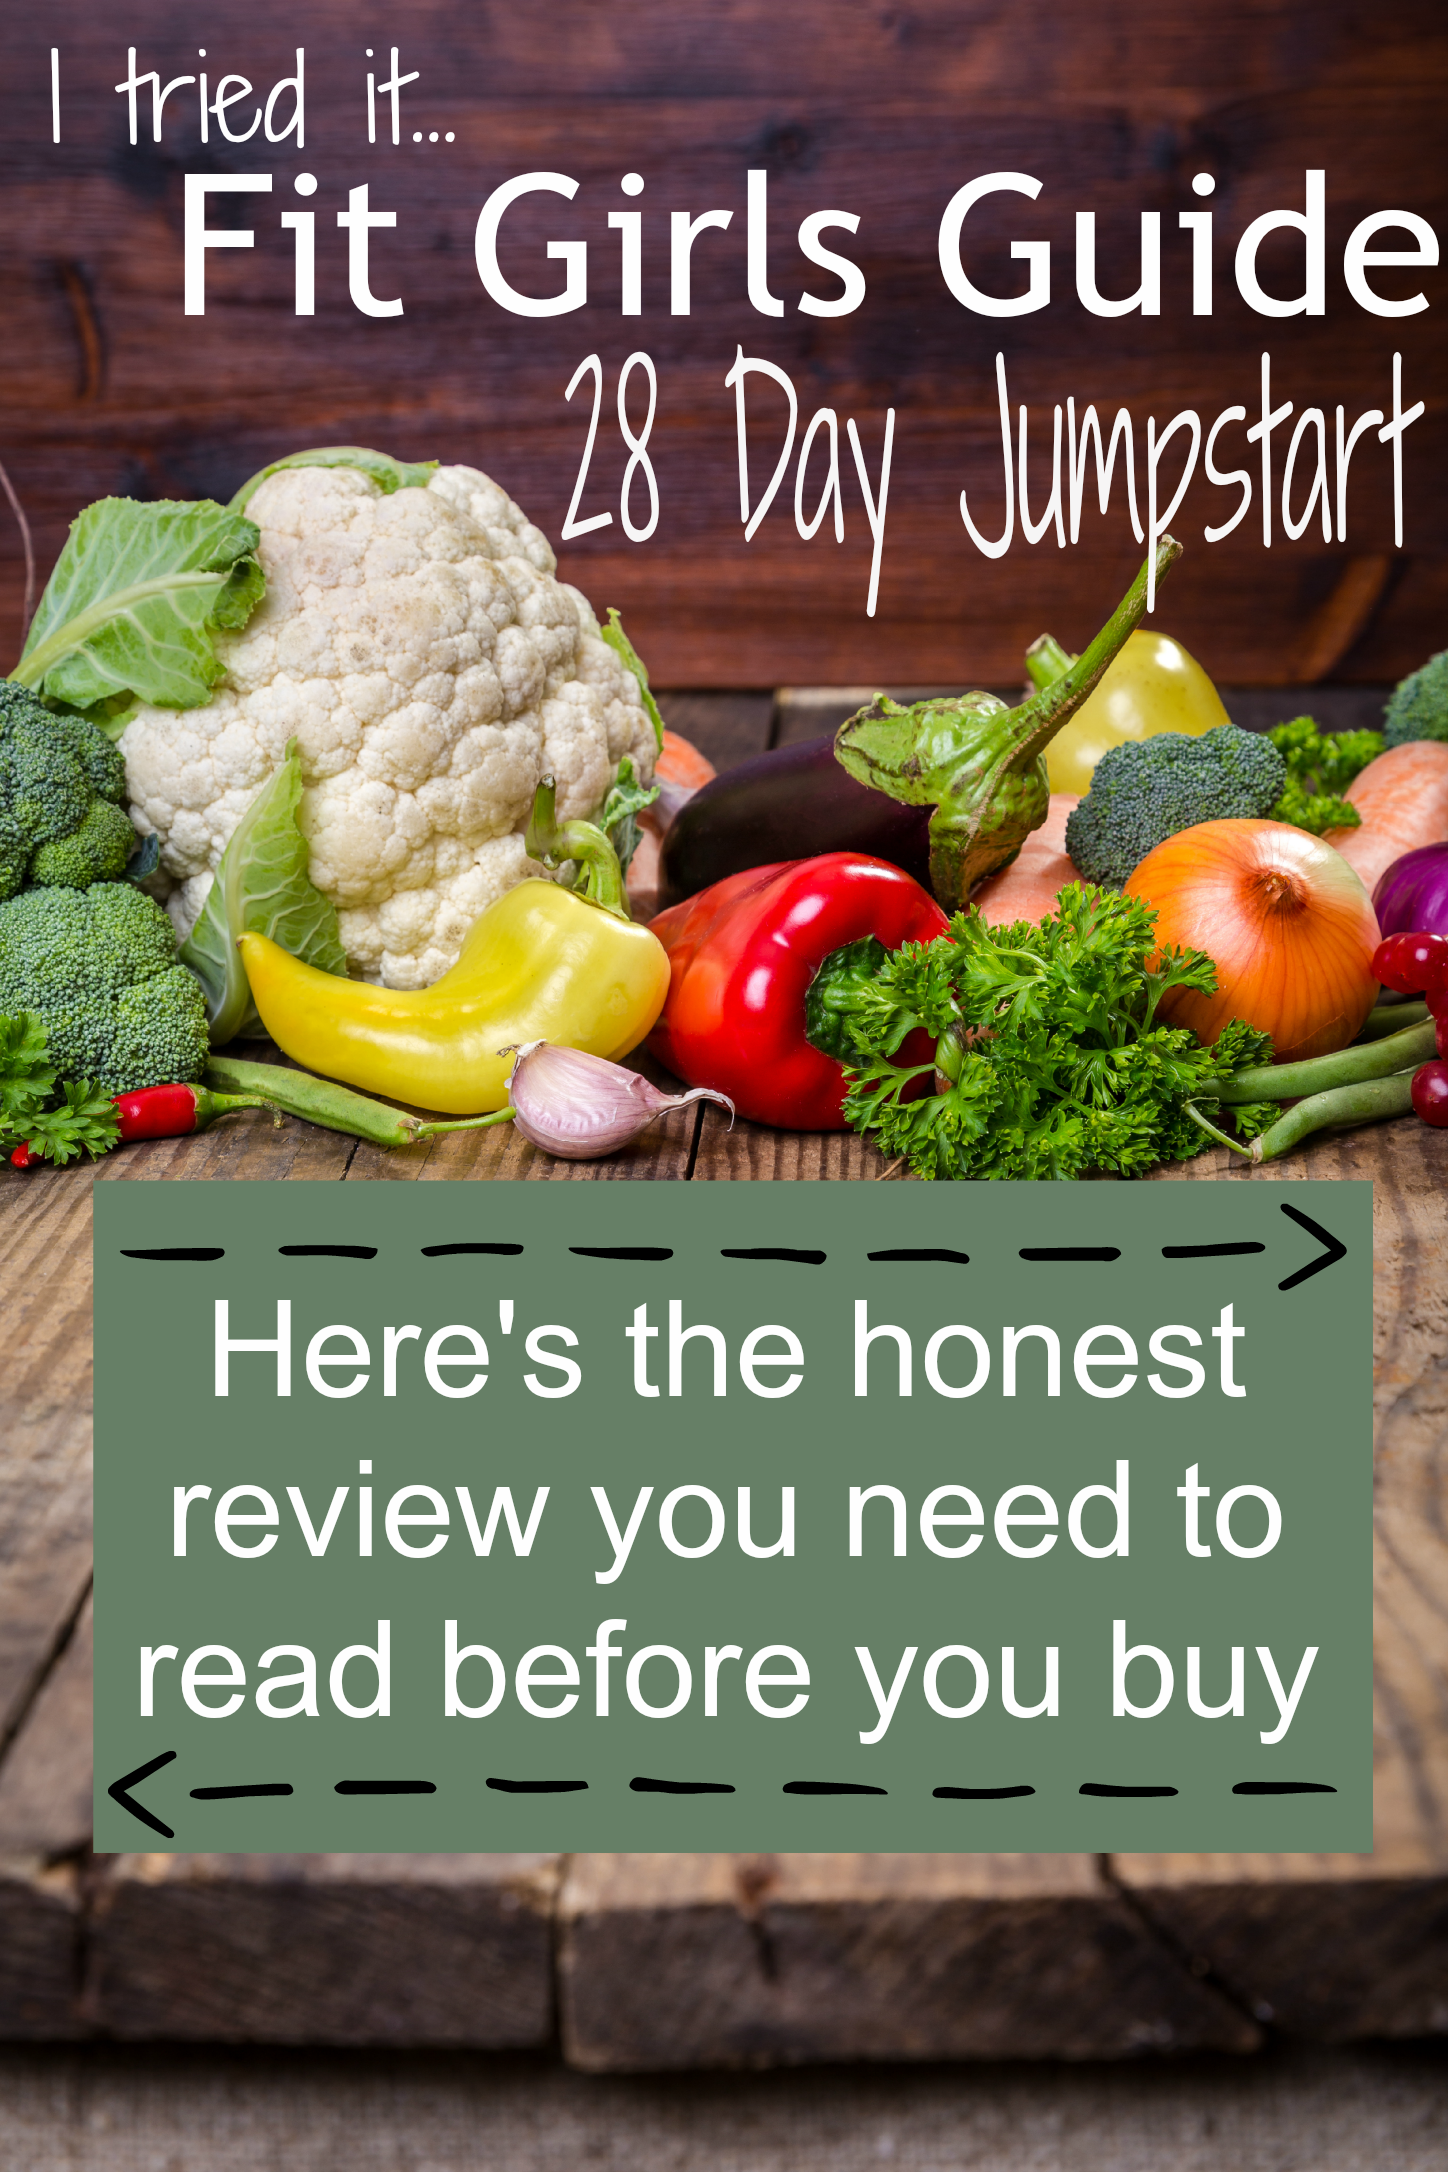 I tried the Fit Girls Guide 28 Day Jumpstart–see my review (and find out how I did)!